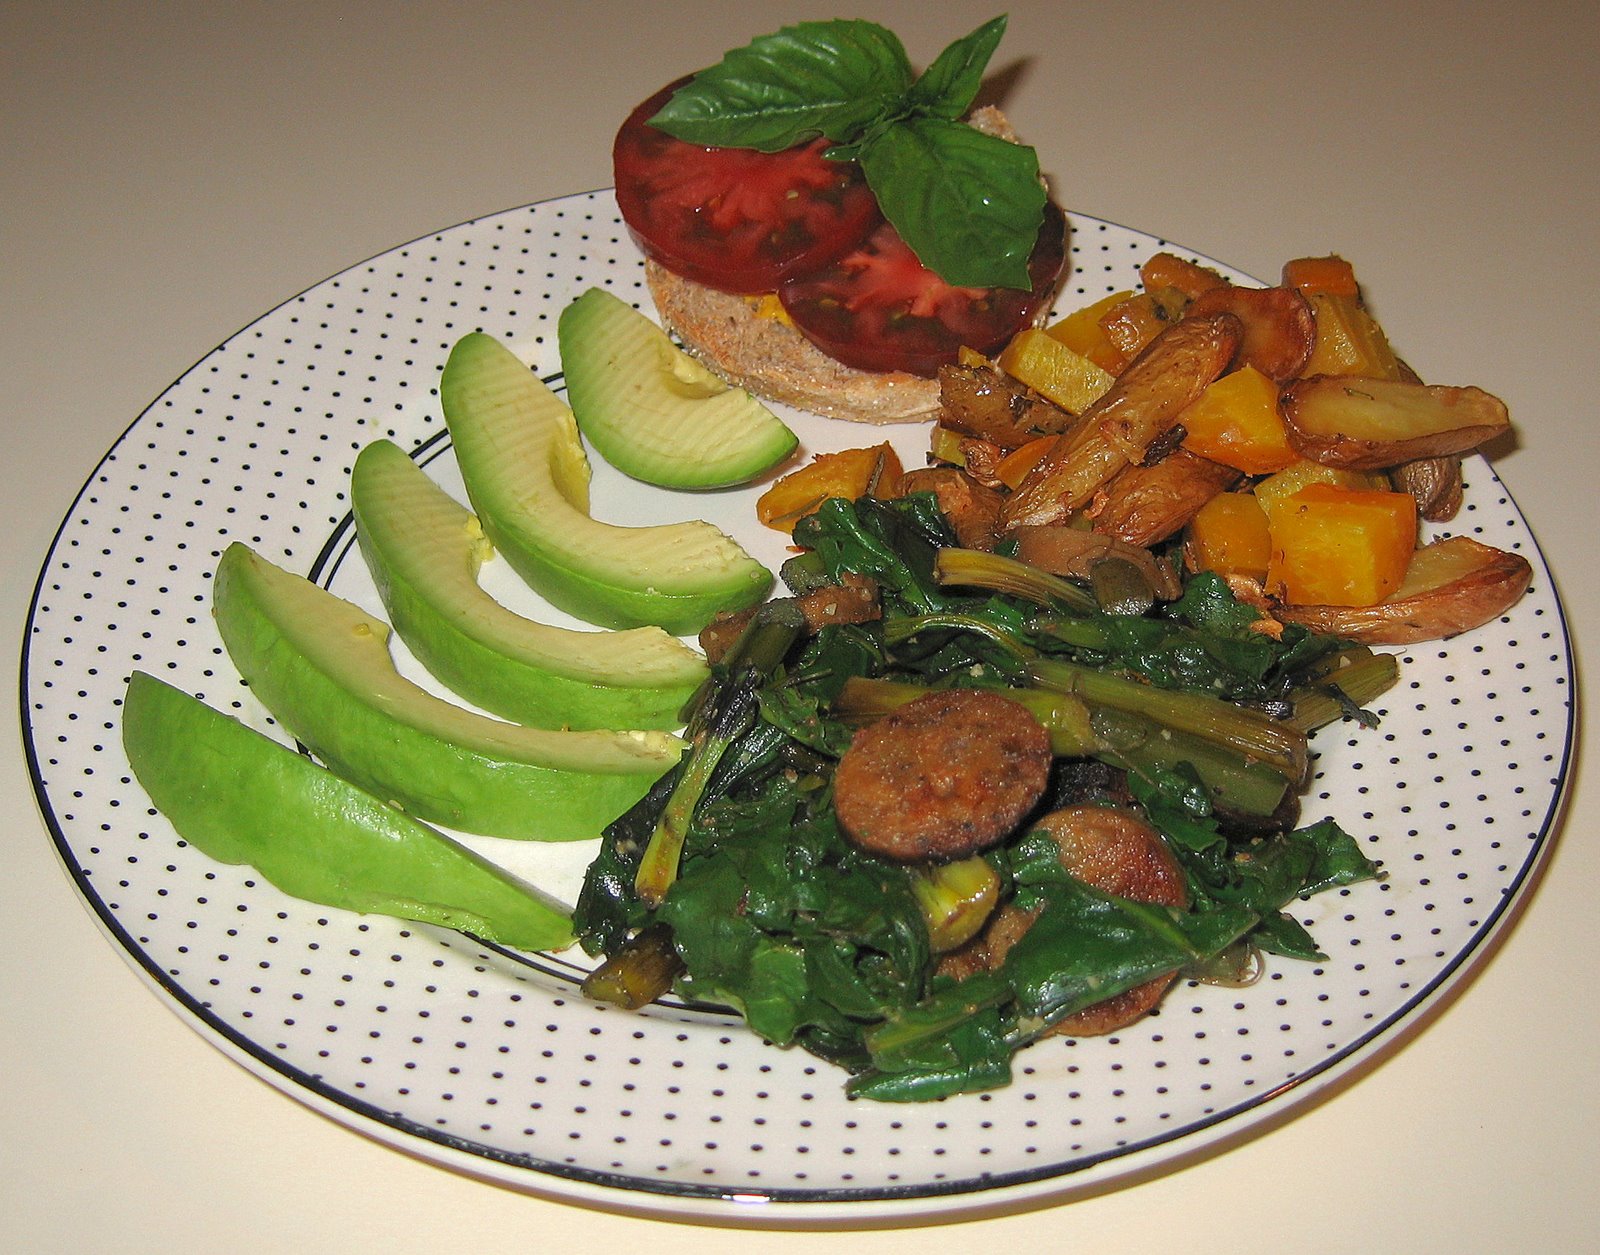 [20070423+Roasted+Golden+Beets+and+Fingerling+Potatoes,+Beet+Greens+with+Vegan+Sausage.jpg]